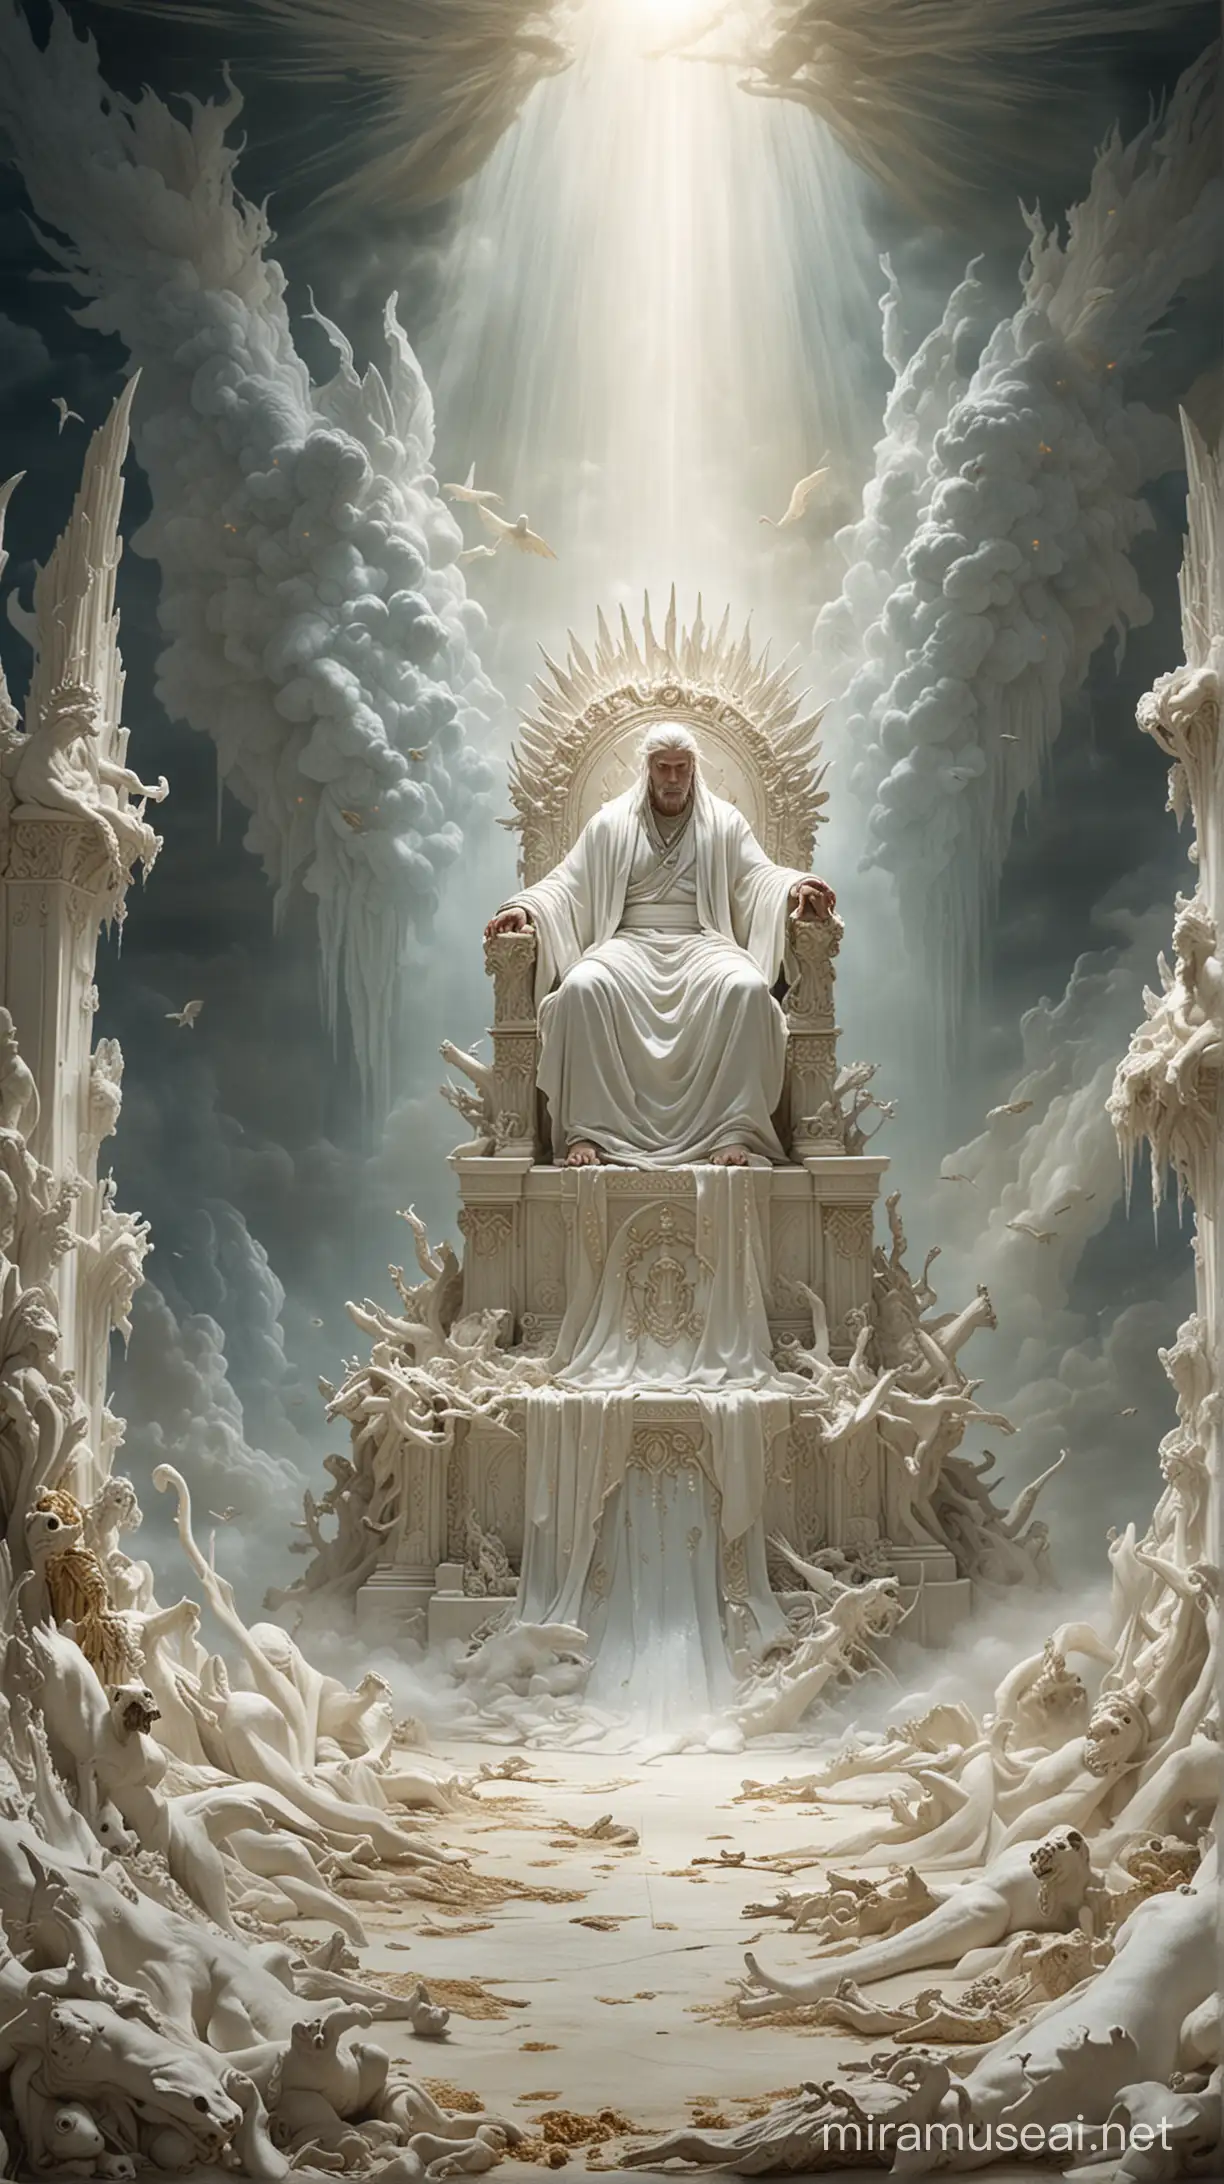 Create a scene depicting a great white throne with a man figure seated upon it, radiating an aura of divine authority, while the earth and heaven flee away in fear. 